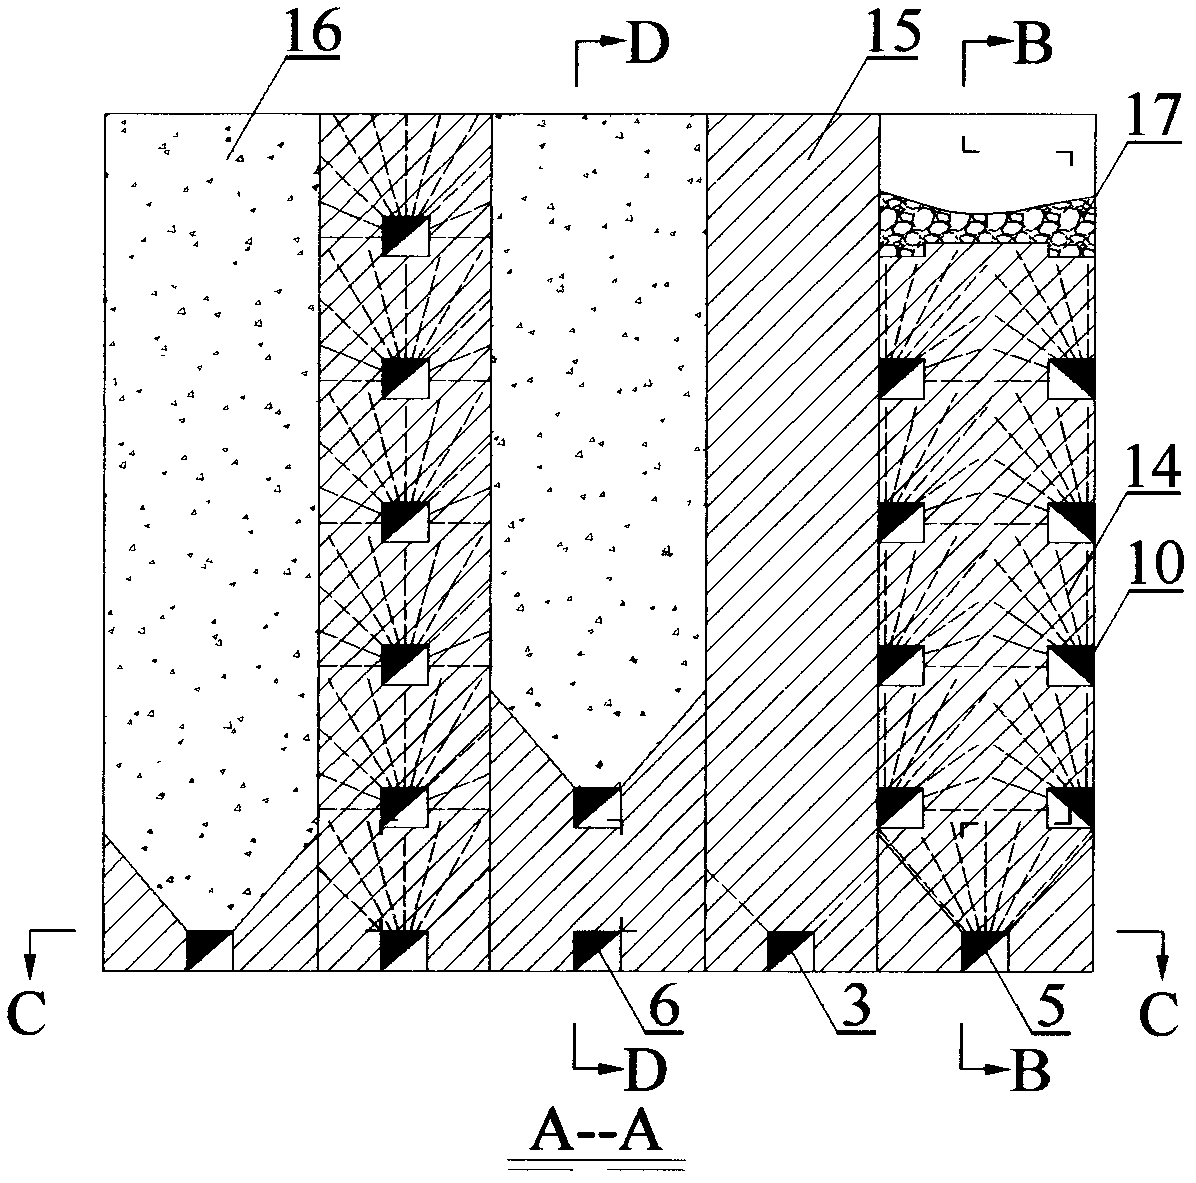 Boundary-controlled room column type sublevel open stoping subsequent stage filling mining method